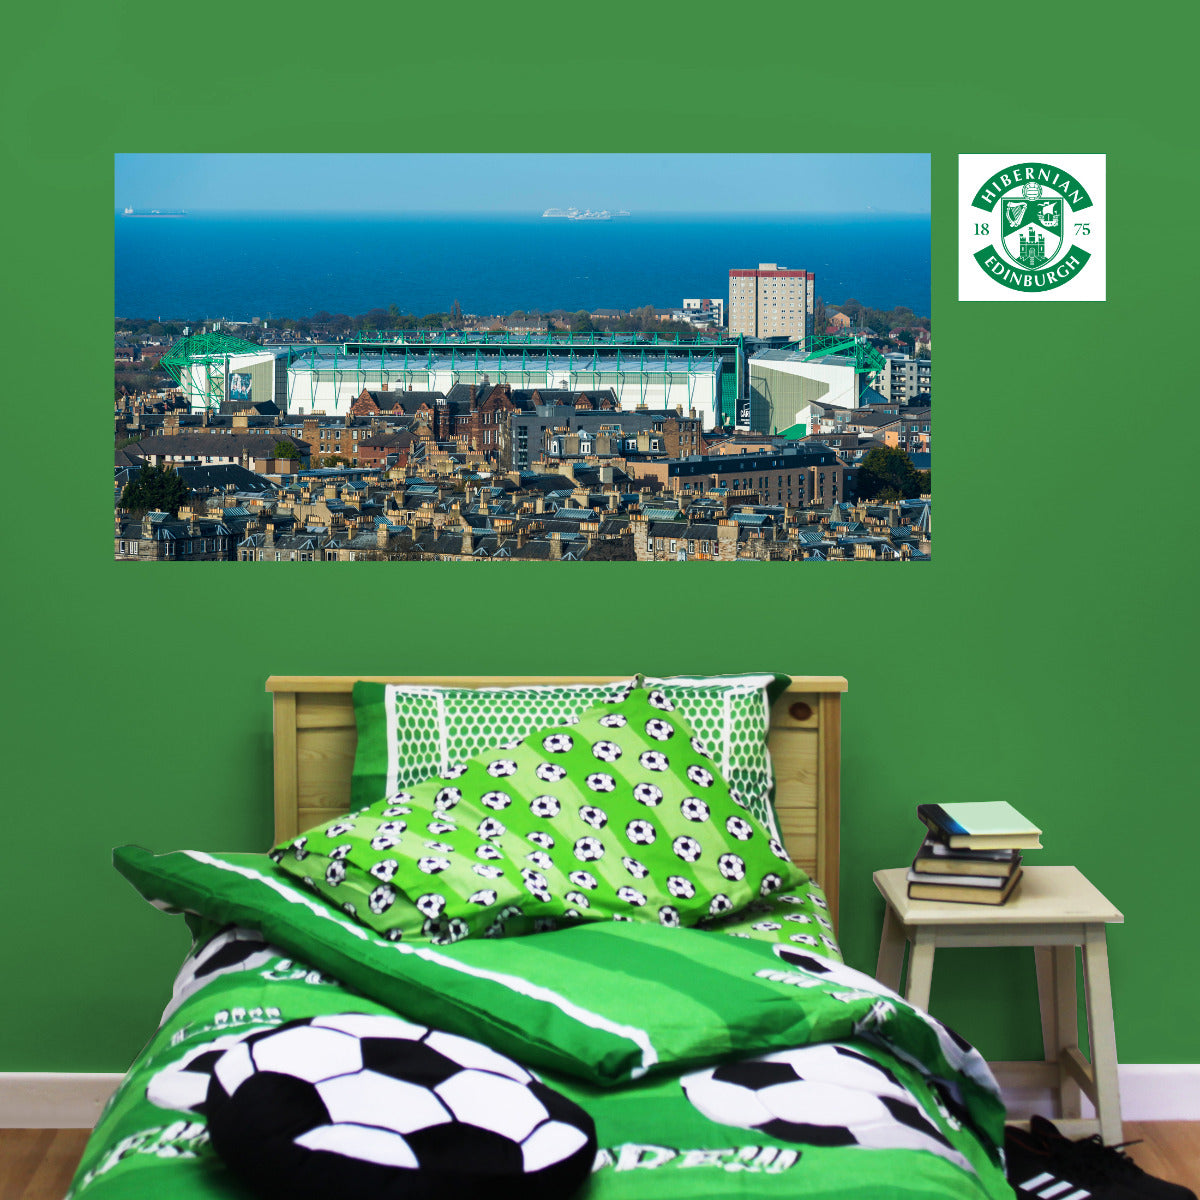 Hibernian Easter Road Stadium Wall Sticker Outside Day Time